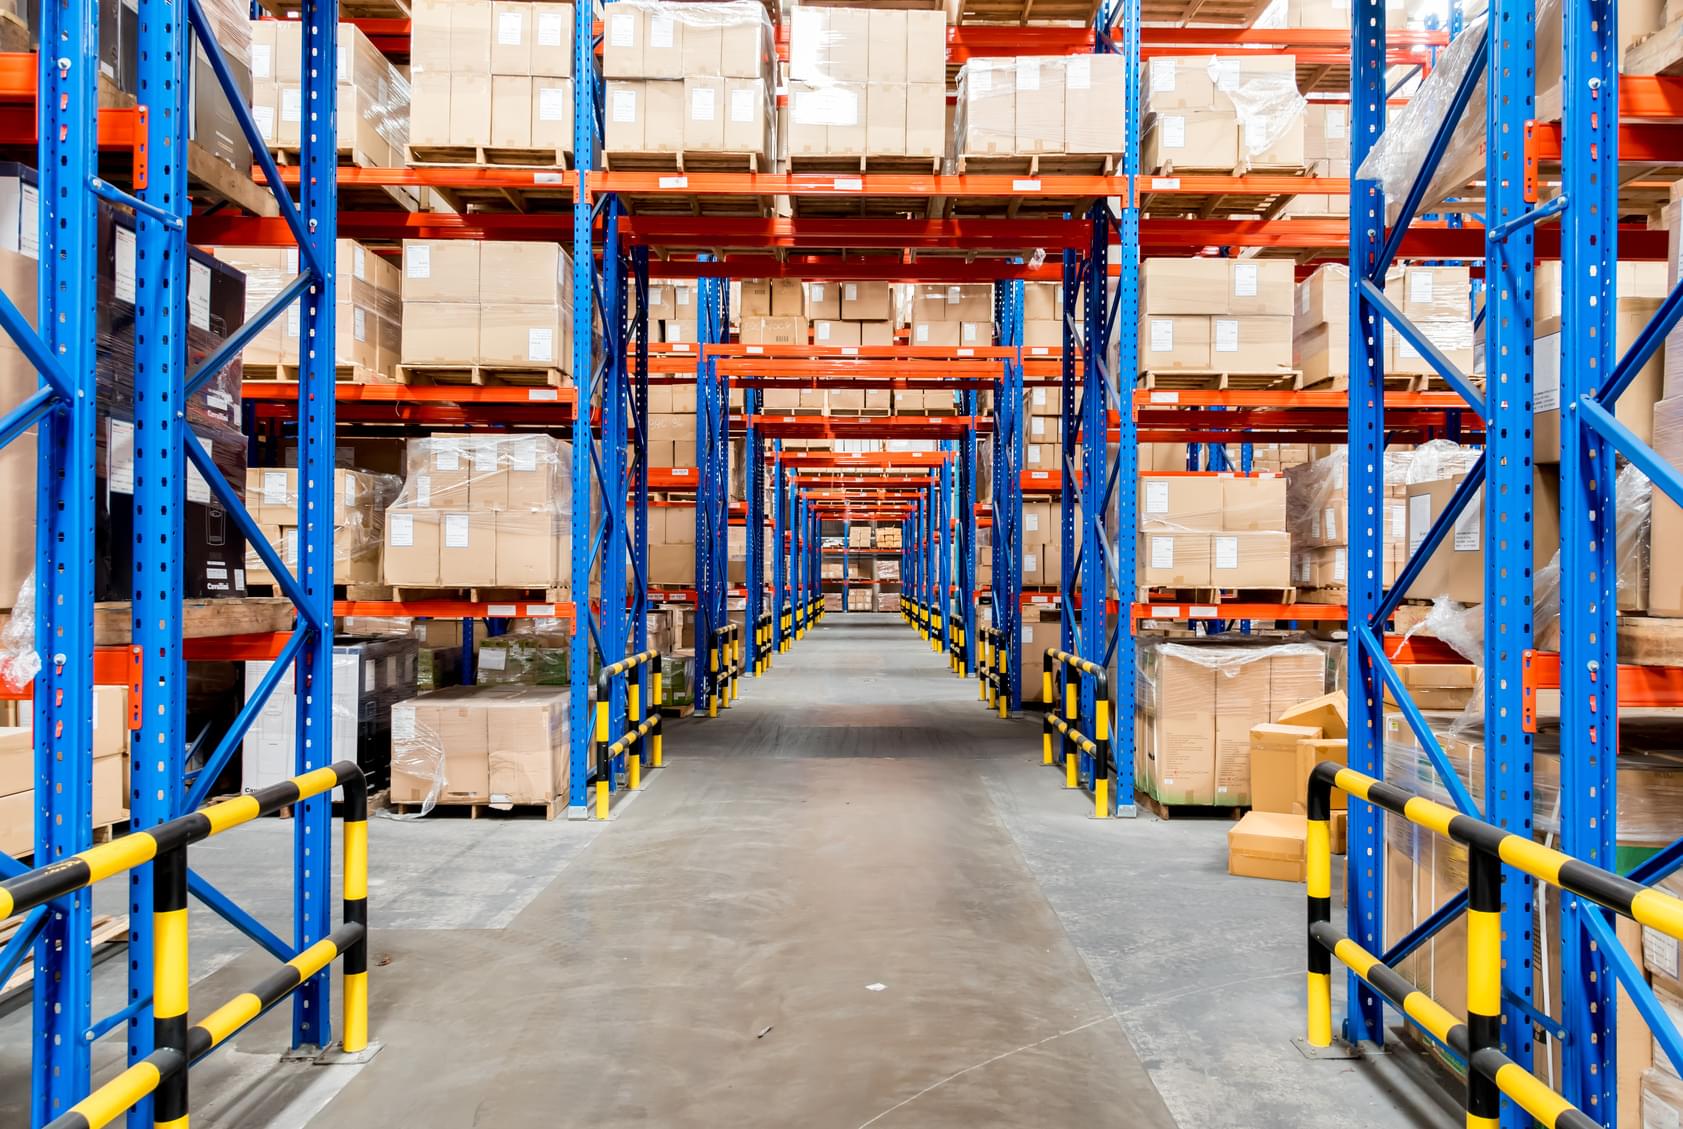 9 Inventory Management Tips to Get The Most Out of Your